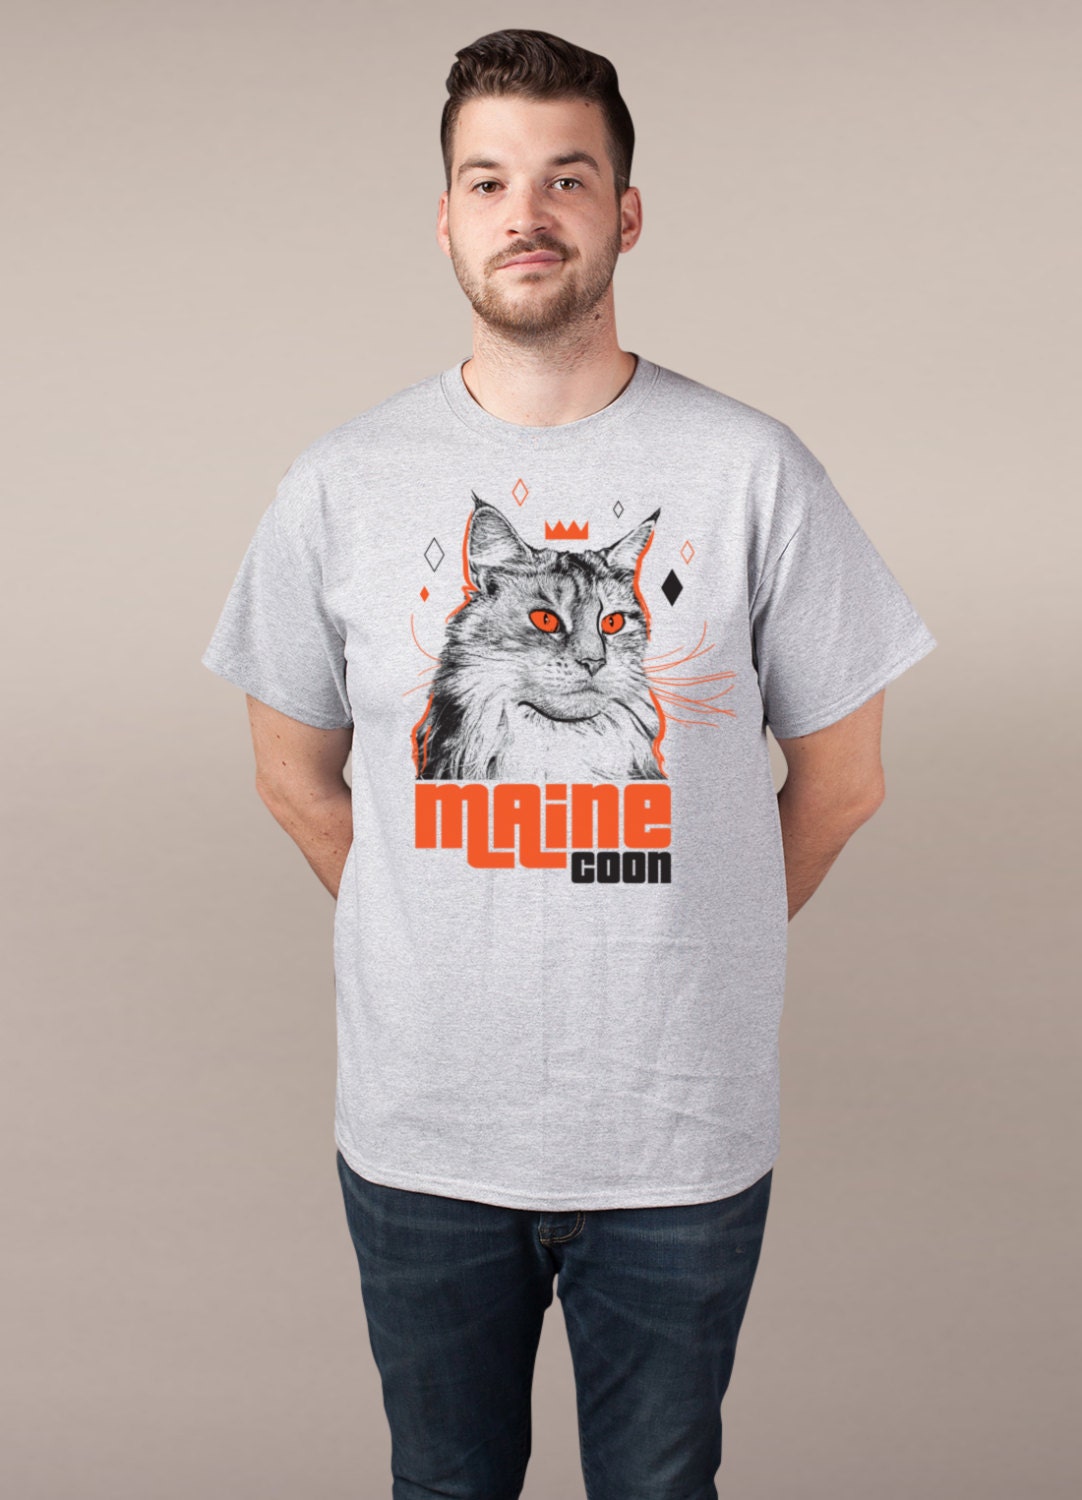 Maine Coon Cat Star Breed T-shirt